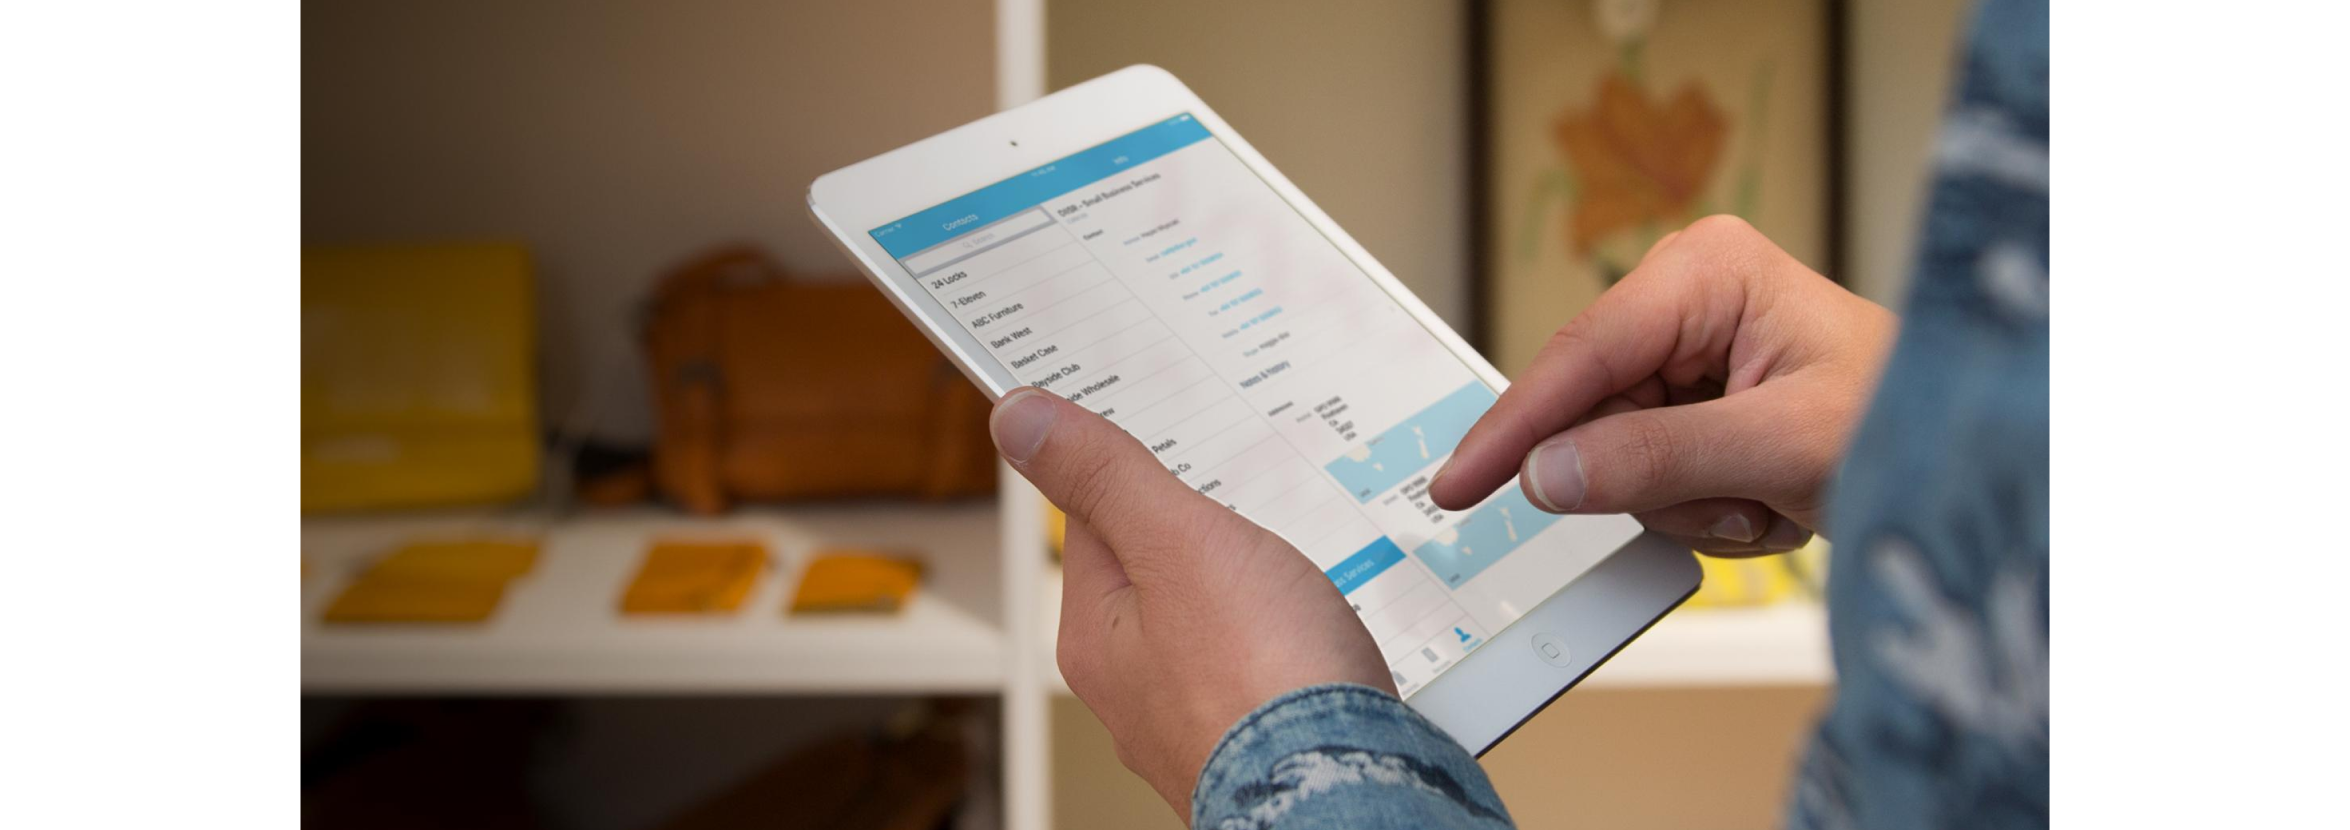 The screen of a mobile device showing a business owner processing a set of payments through Xero Pay with Wise.